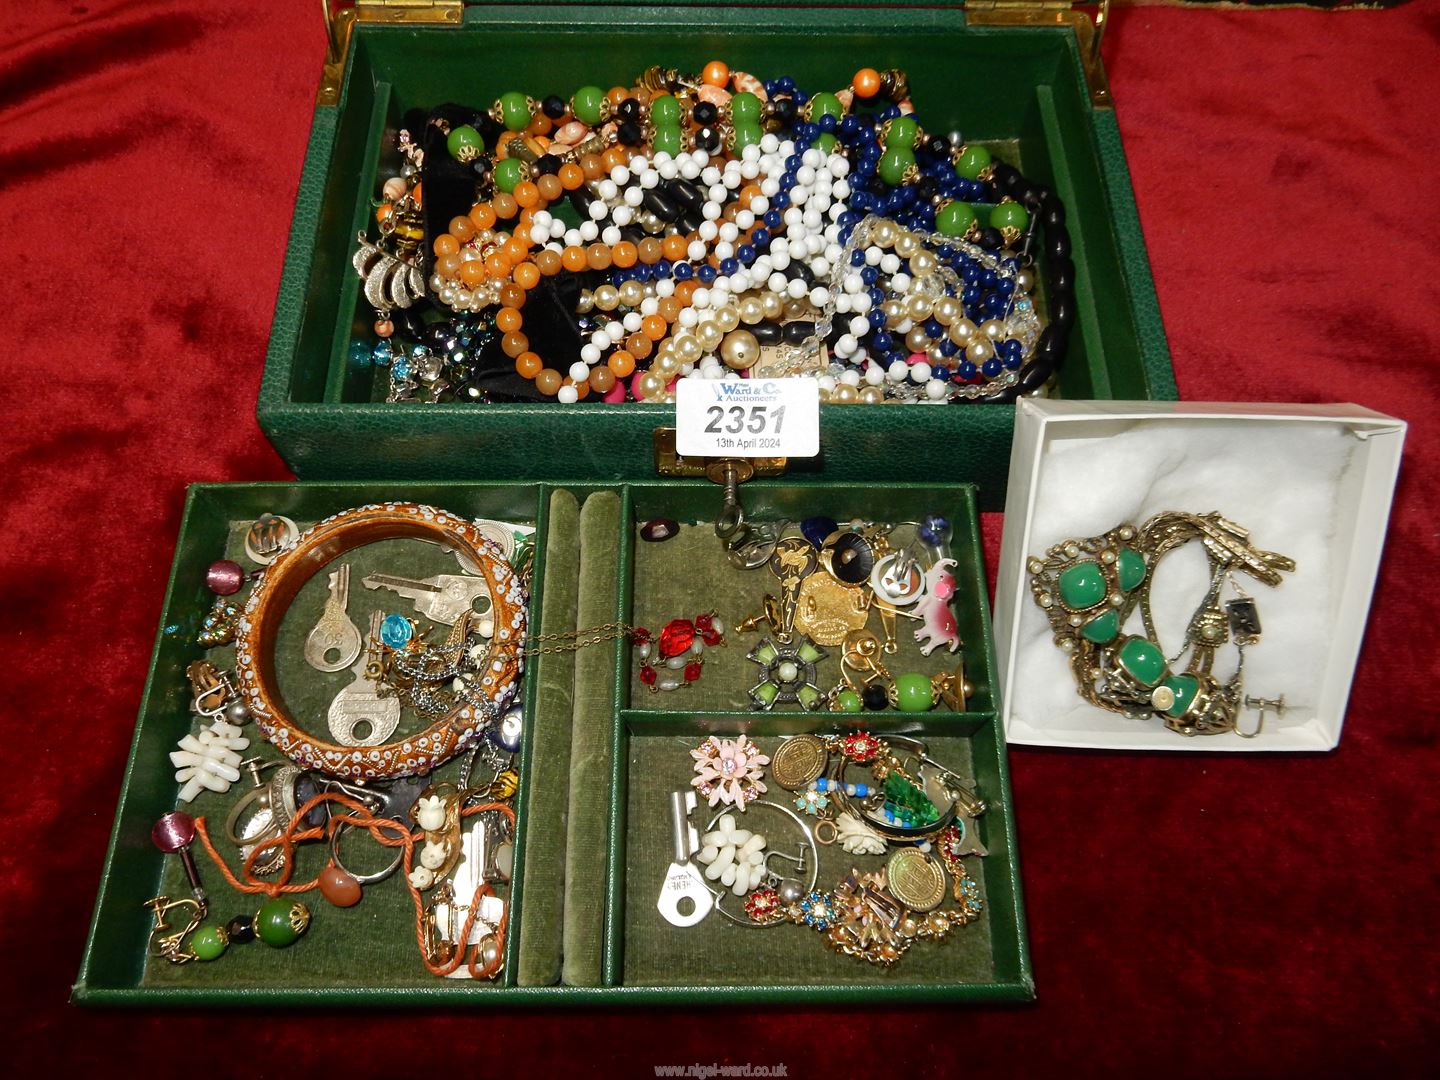 A green jewellery box and contents of bead necklaces, earrings etc.